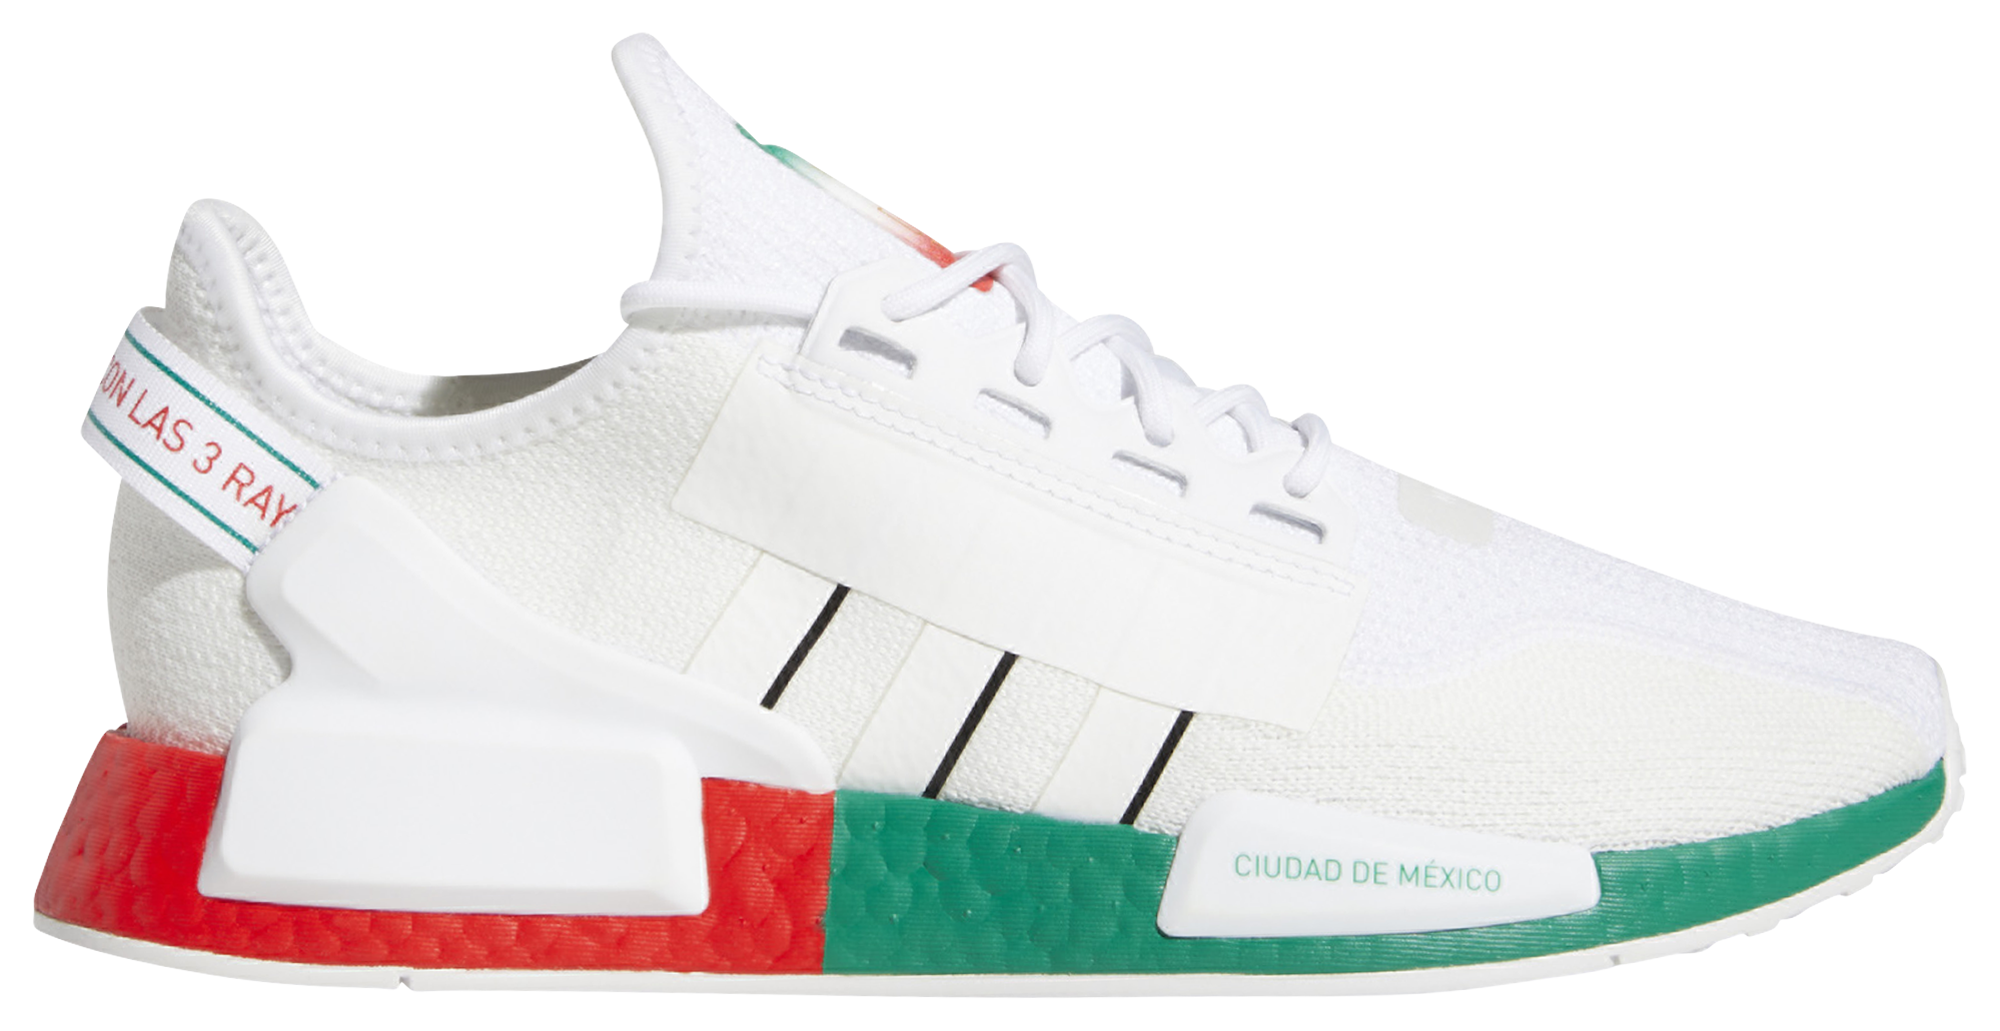 Adidas NMD R1 W Group Purchase and PTT Recommendation 2020 Monthly Feibi Price